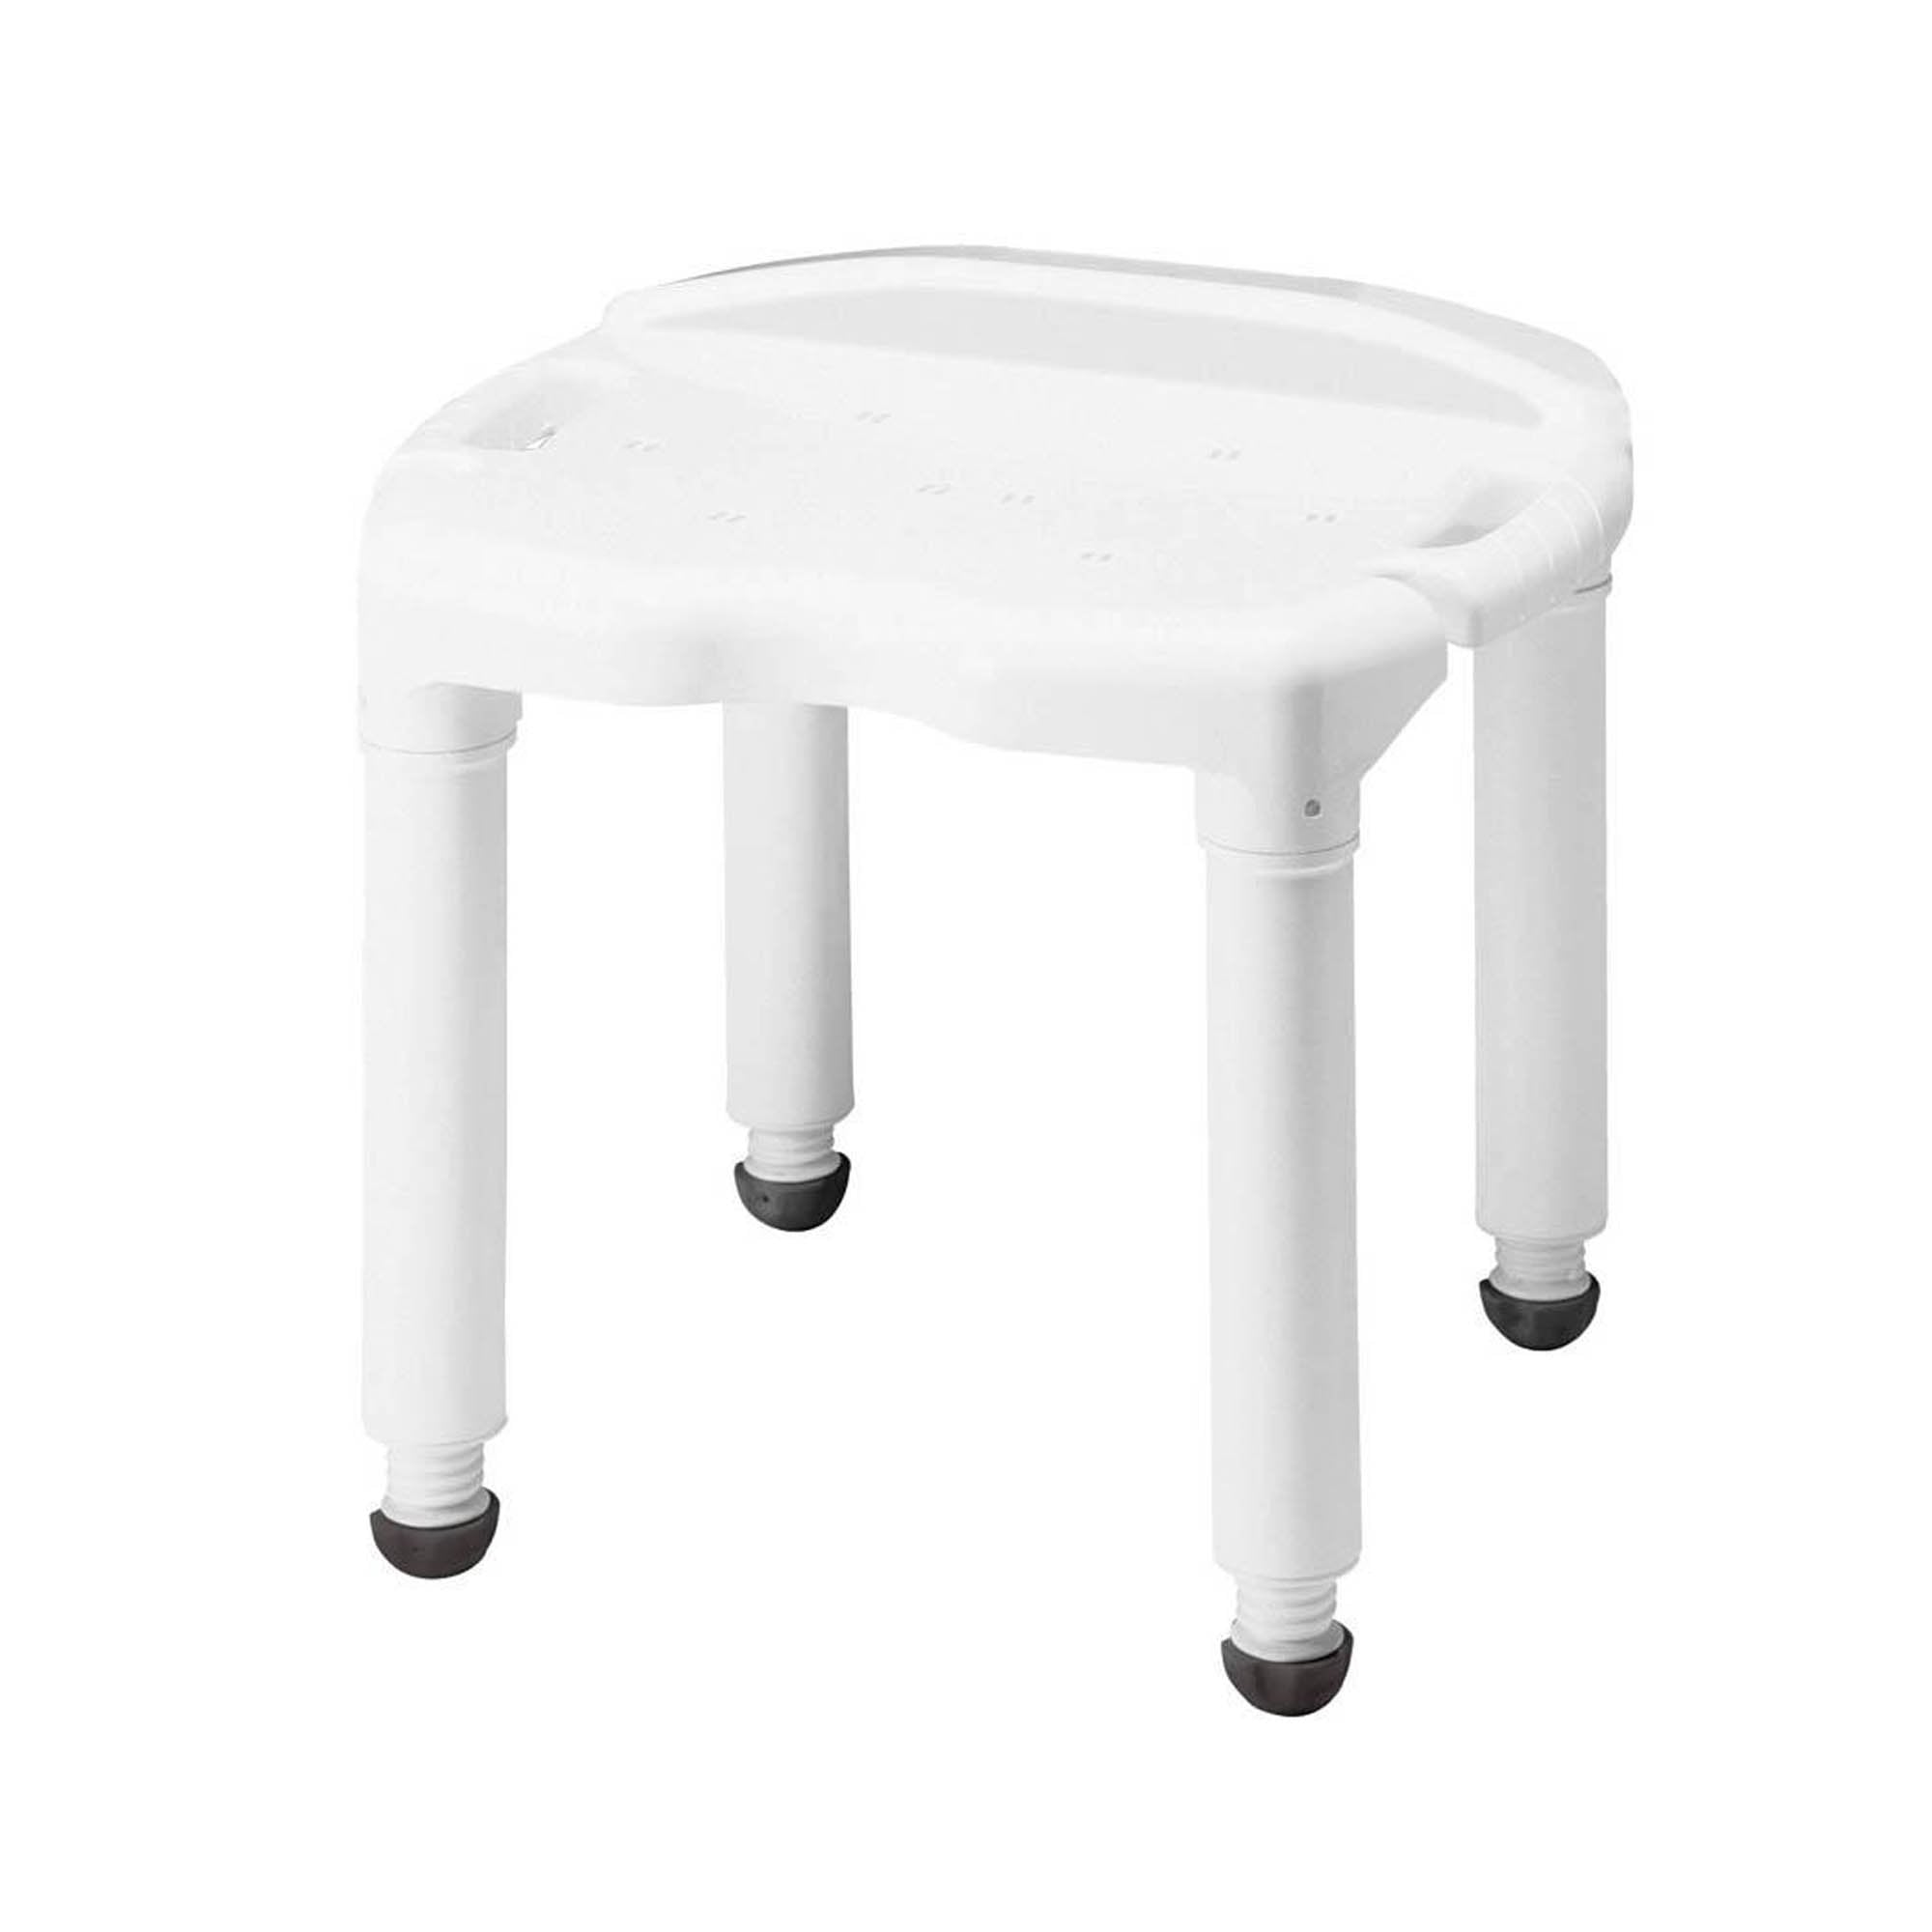 Apex-Carex FGB670C0 0000 Bath Bench Carex® Without Arms Plastic Frame Without Backrest 21 Inch Seat Width 400 lbs. Weight Capacity